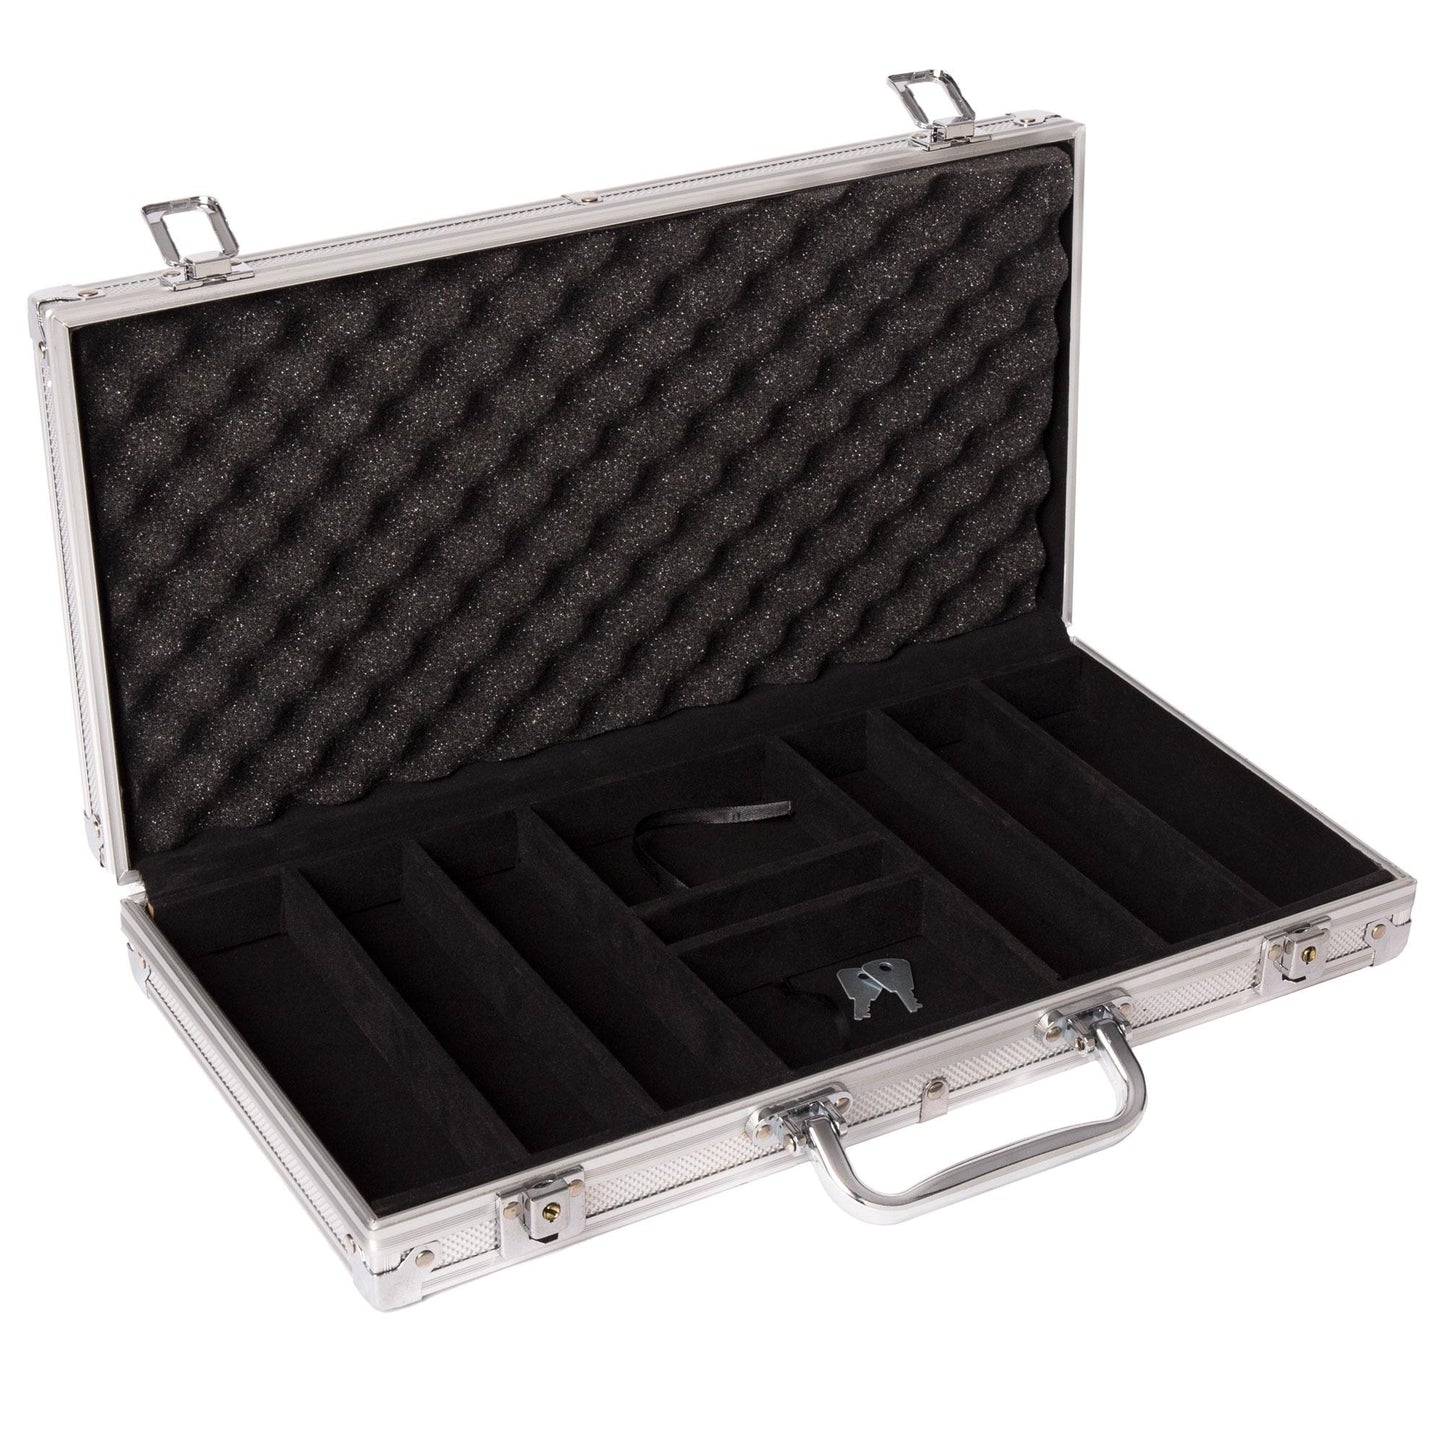 300 Striped Dice Poker Chips with Aluminum Case